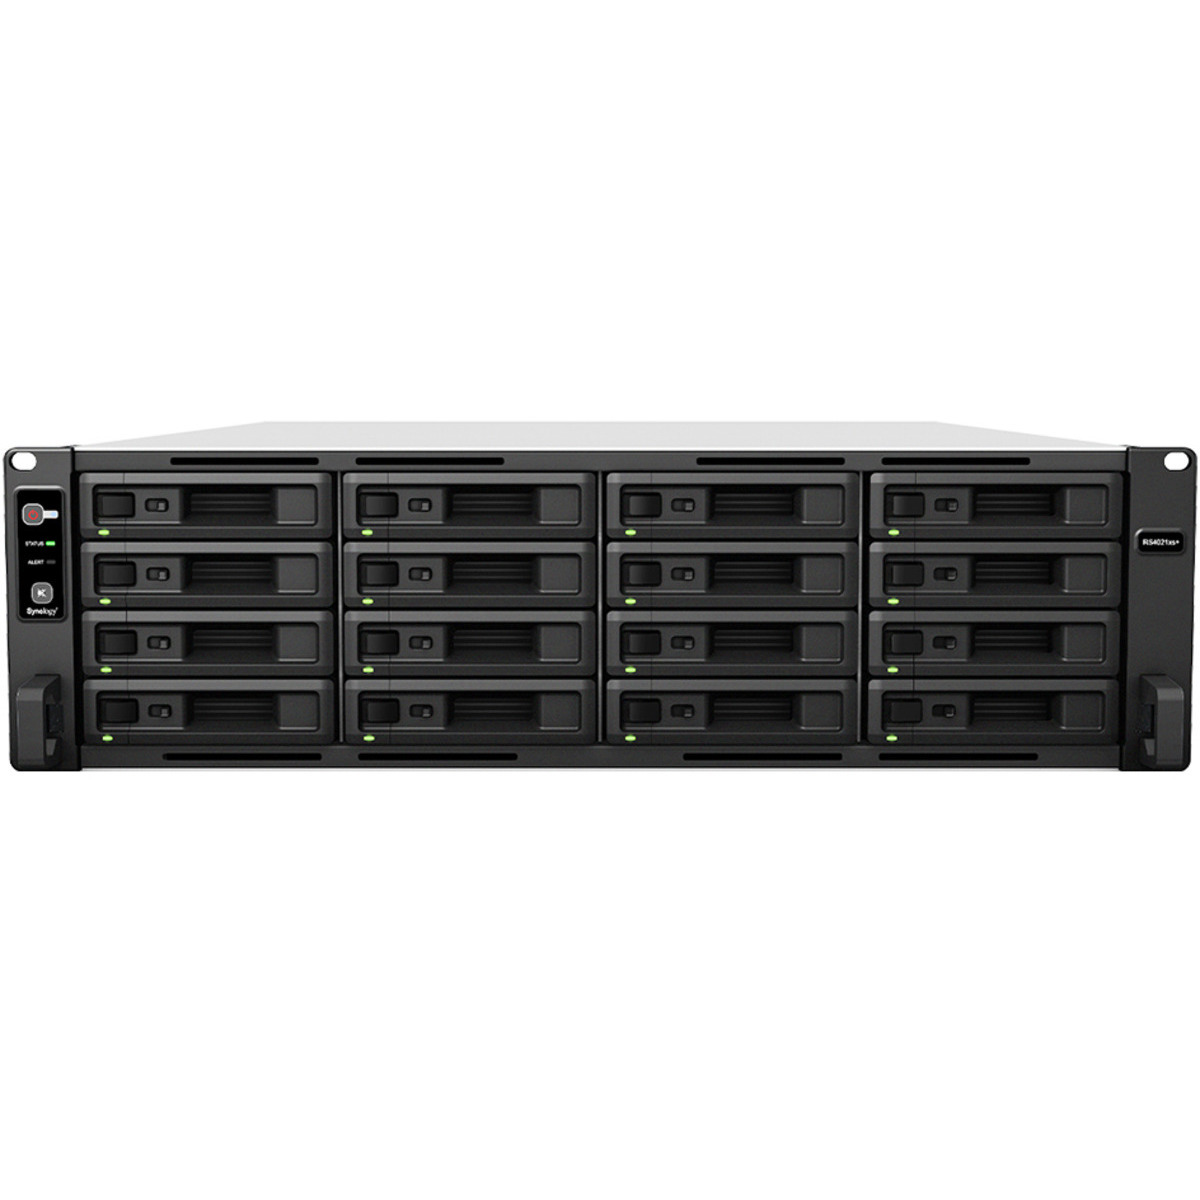 Synology RackStation RS4021xs+ 64tb 16-Bay RackMount Large Business / Enterprise NAS - Network Attached Storage Device 16x4tb Samsung 870 QVO MZ-77Q4T0 2.5 560/530MB/s SATA 6Gb/s SSD CONSUMER Class Drives Installed - Burn-In Tested RackStation RS4021xs+